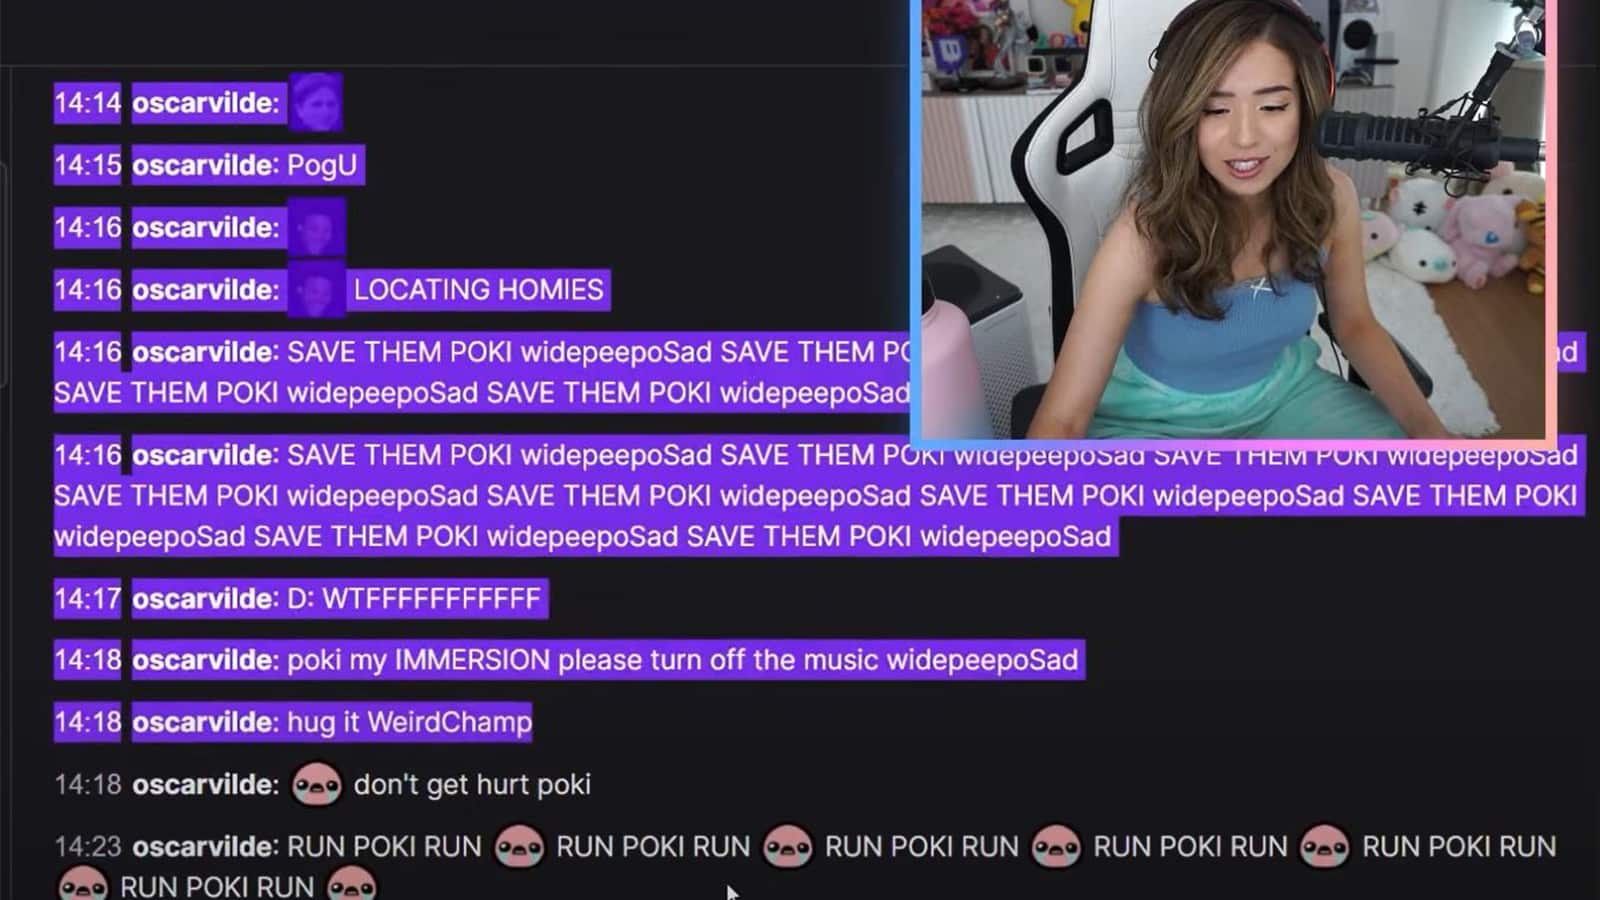 How To Unban Twitch Pokimane stunned by “perfect unban request” from apologetic Twitch fan -  Dexerto